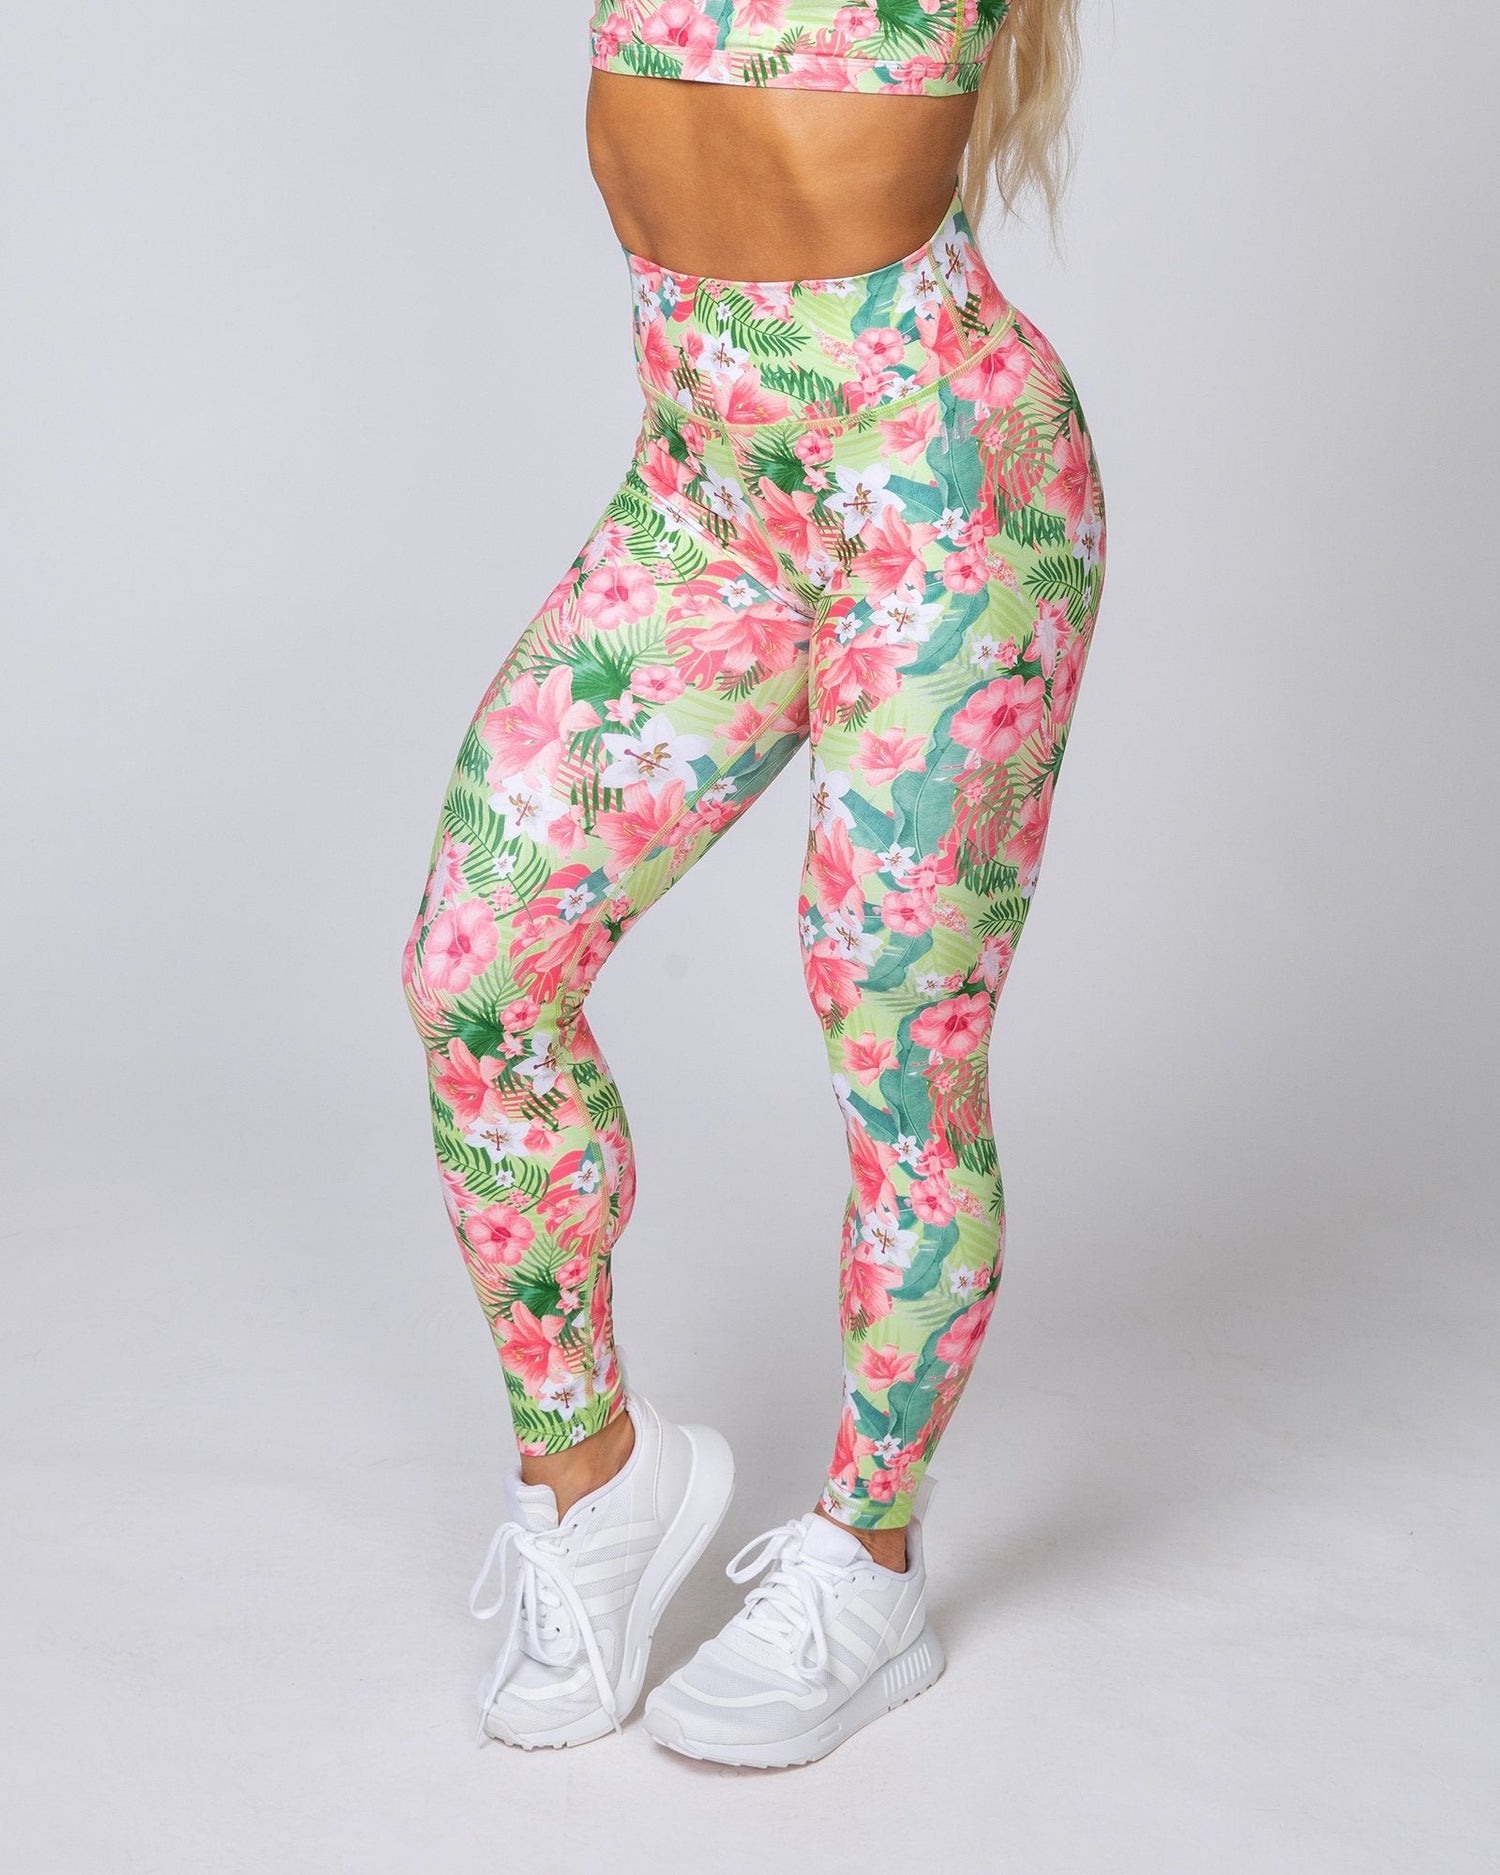 Gym clothes women, Muscle Nation, Clothes gym, Activewear for women, Gym clothes for women, Australian Activewear, Australian Activewear brands, Gym leggings for women, Squat proof leggings, Leggings for women, Womens gym tights, Supportive leggings, Scrunch bum tights, High waisted leggings